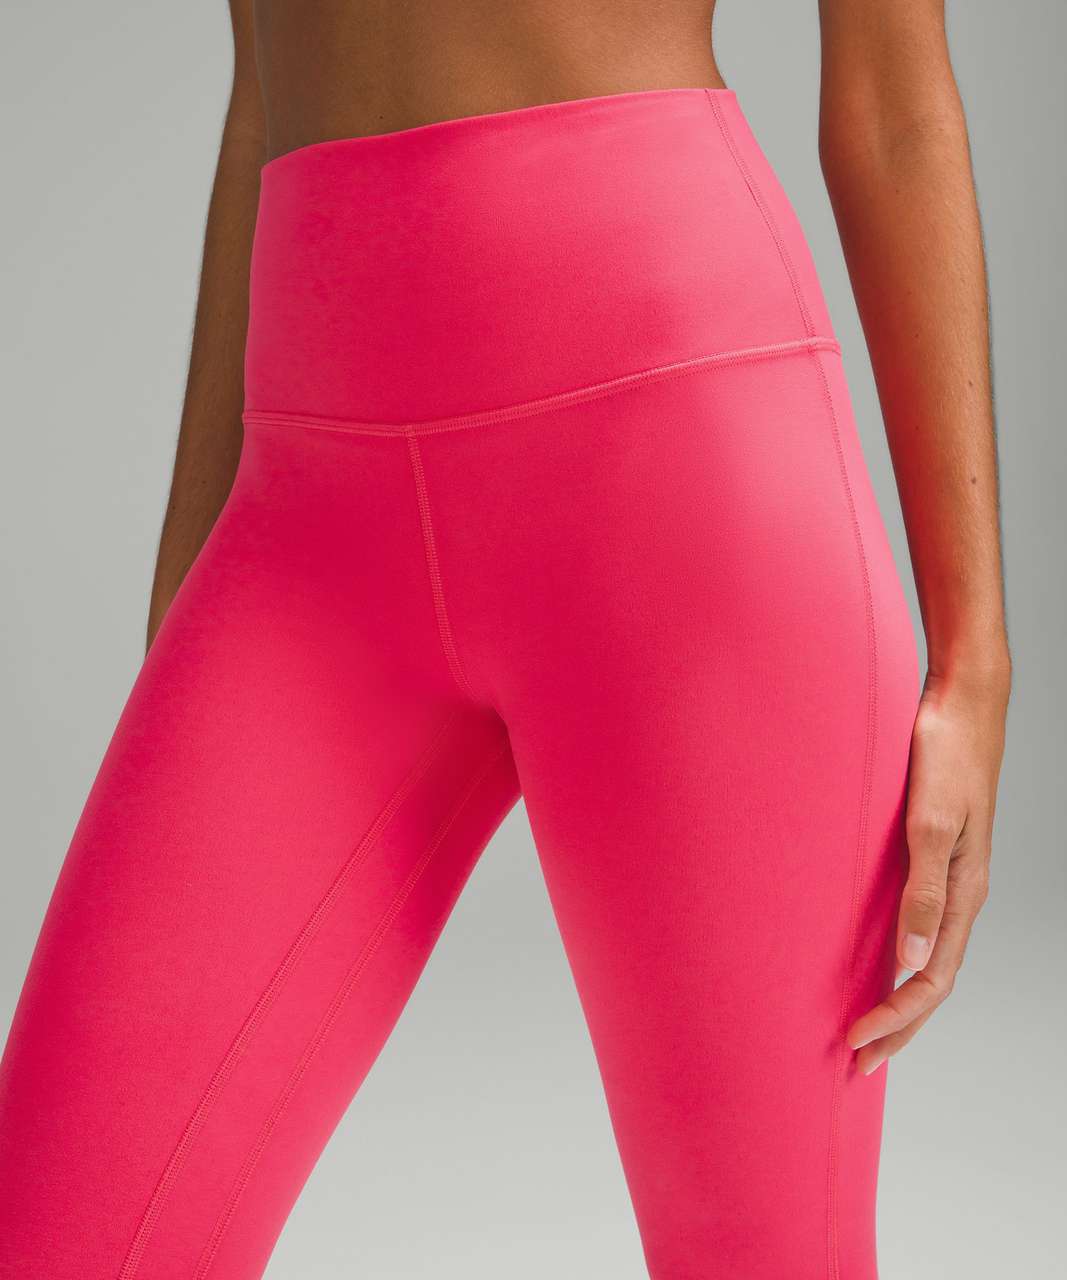 Lululemon Align High-Rise Pant with ☆Pockets☆ 28 Lip Gloss Size 2  Authentic Nwt